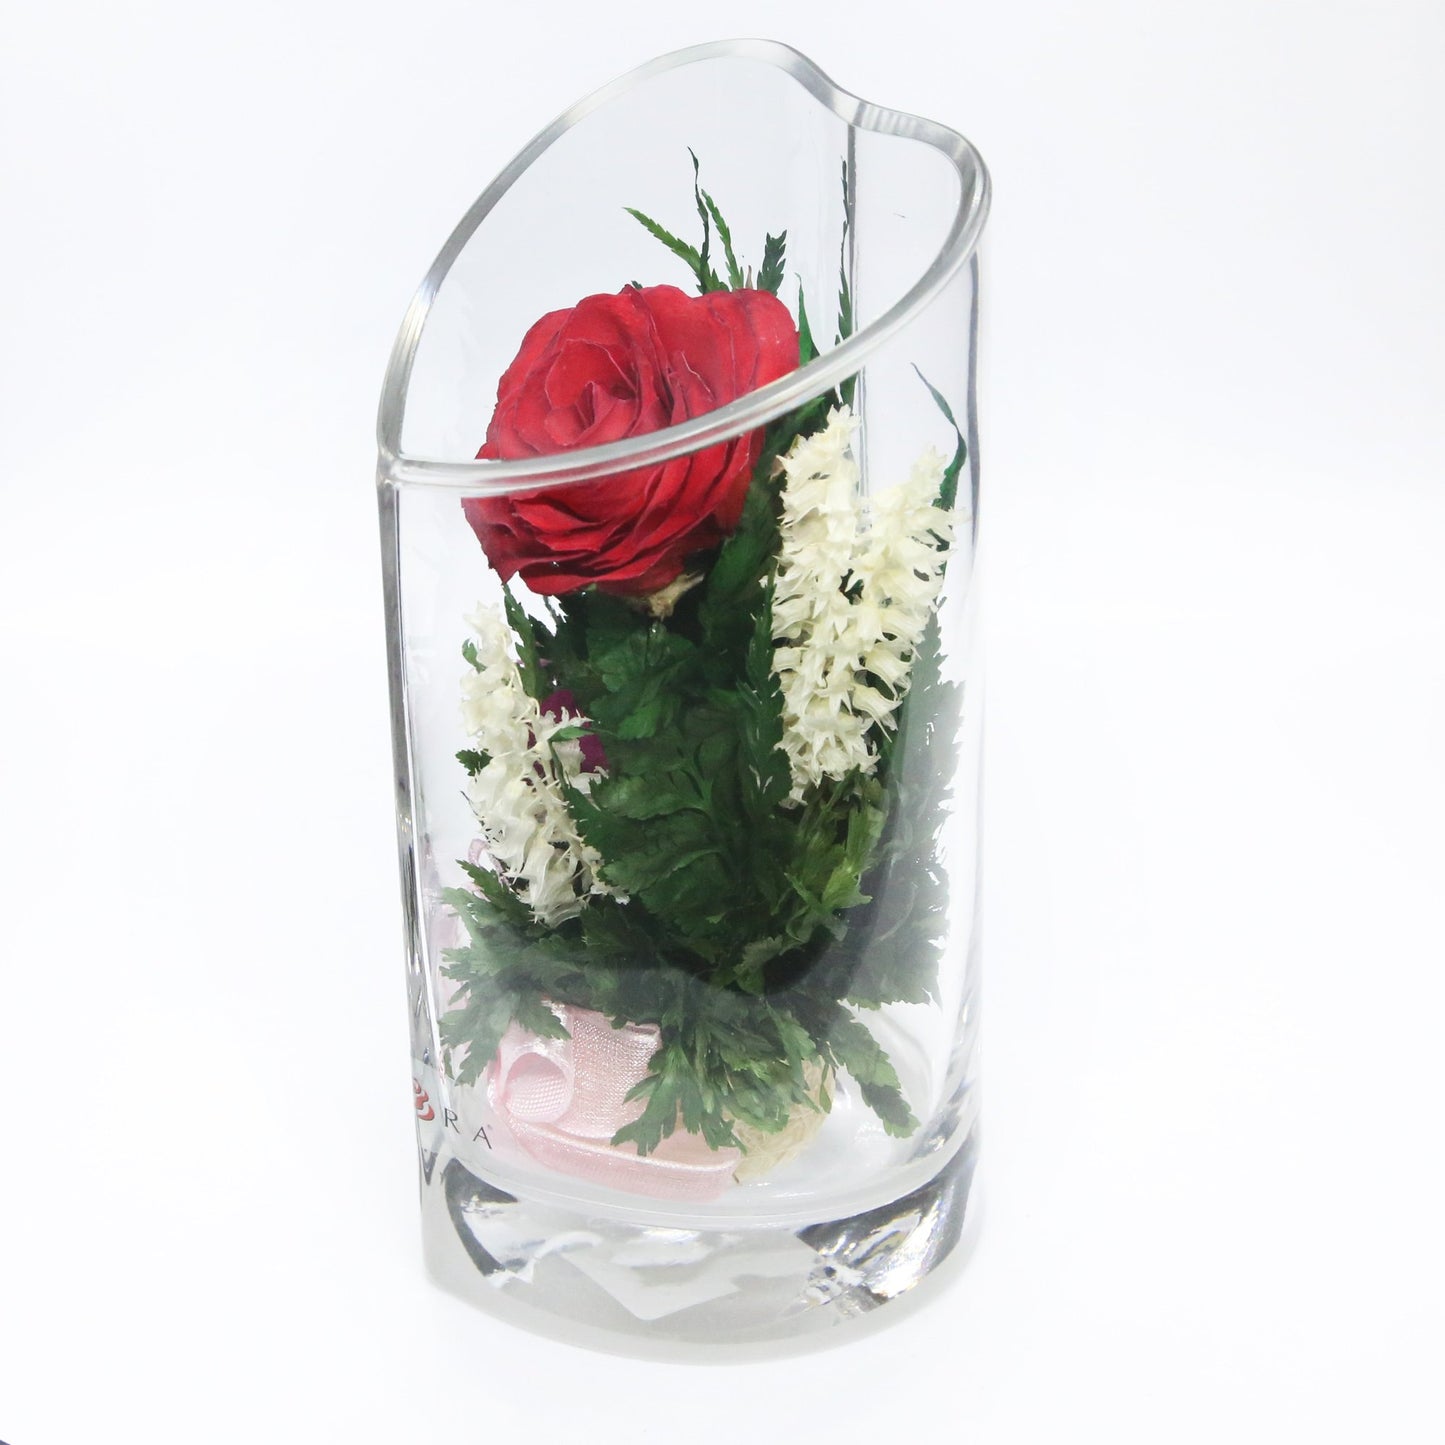 52576 Long-Lasting Red Rose with White Limoniums and Greenery in a Heart-Shaped Vase - FIORA FLOWER